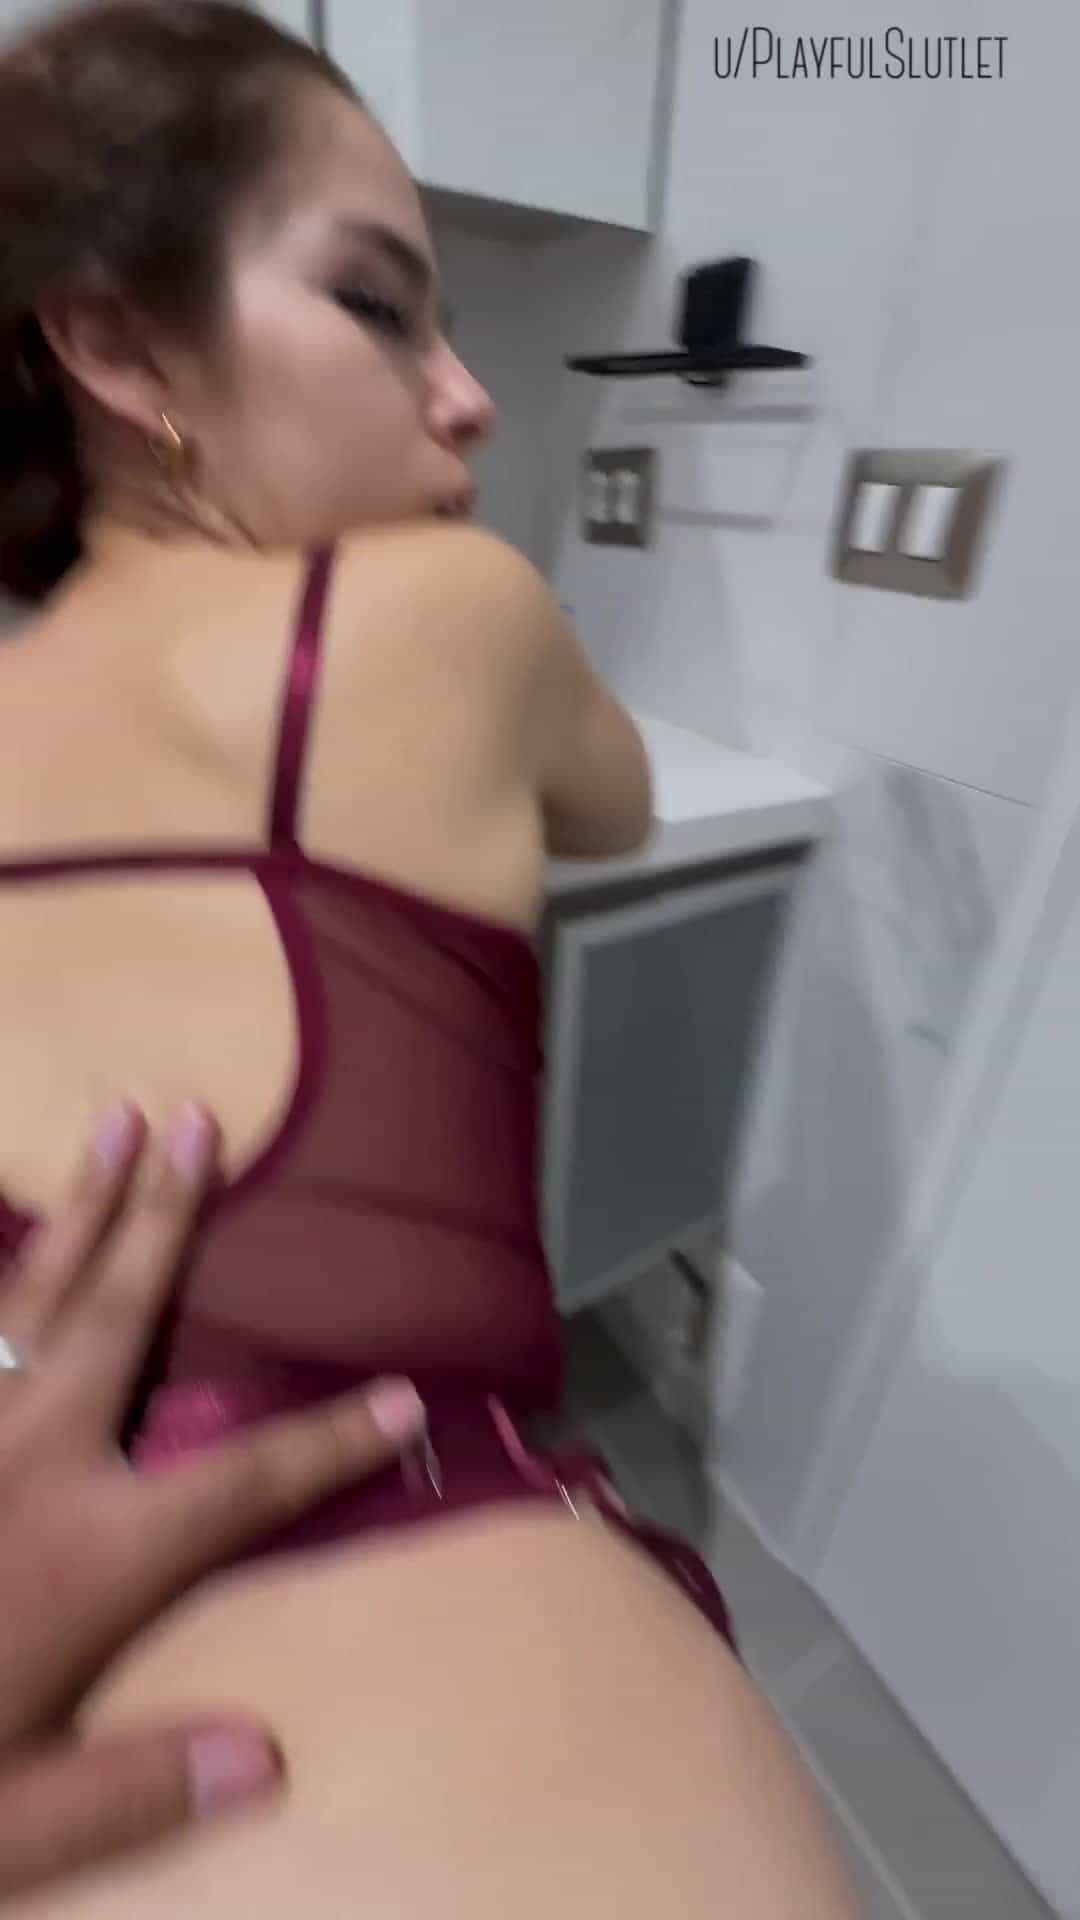 He fucked me in the bathroom and left my pussy full of his cum